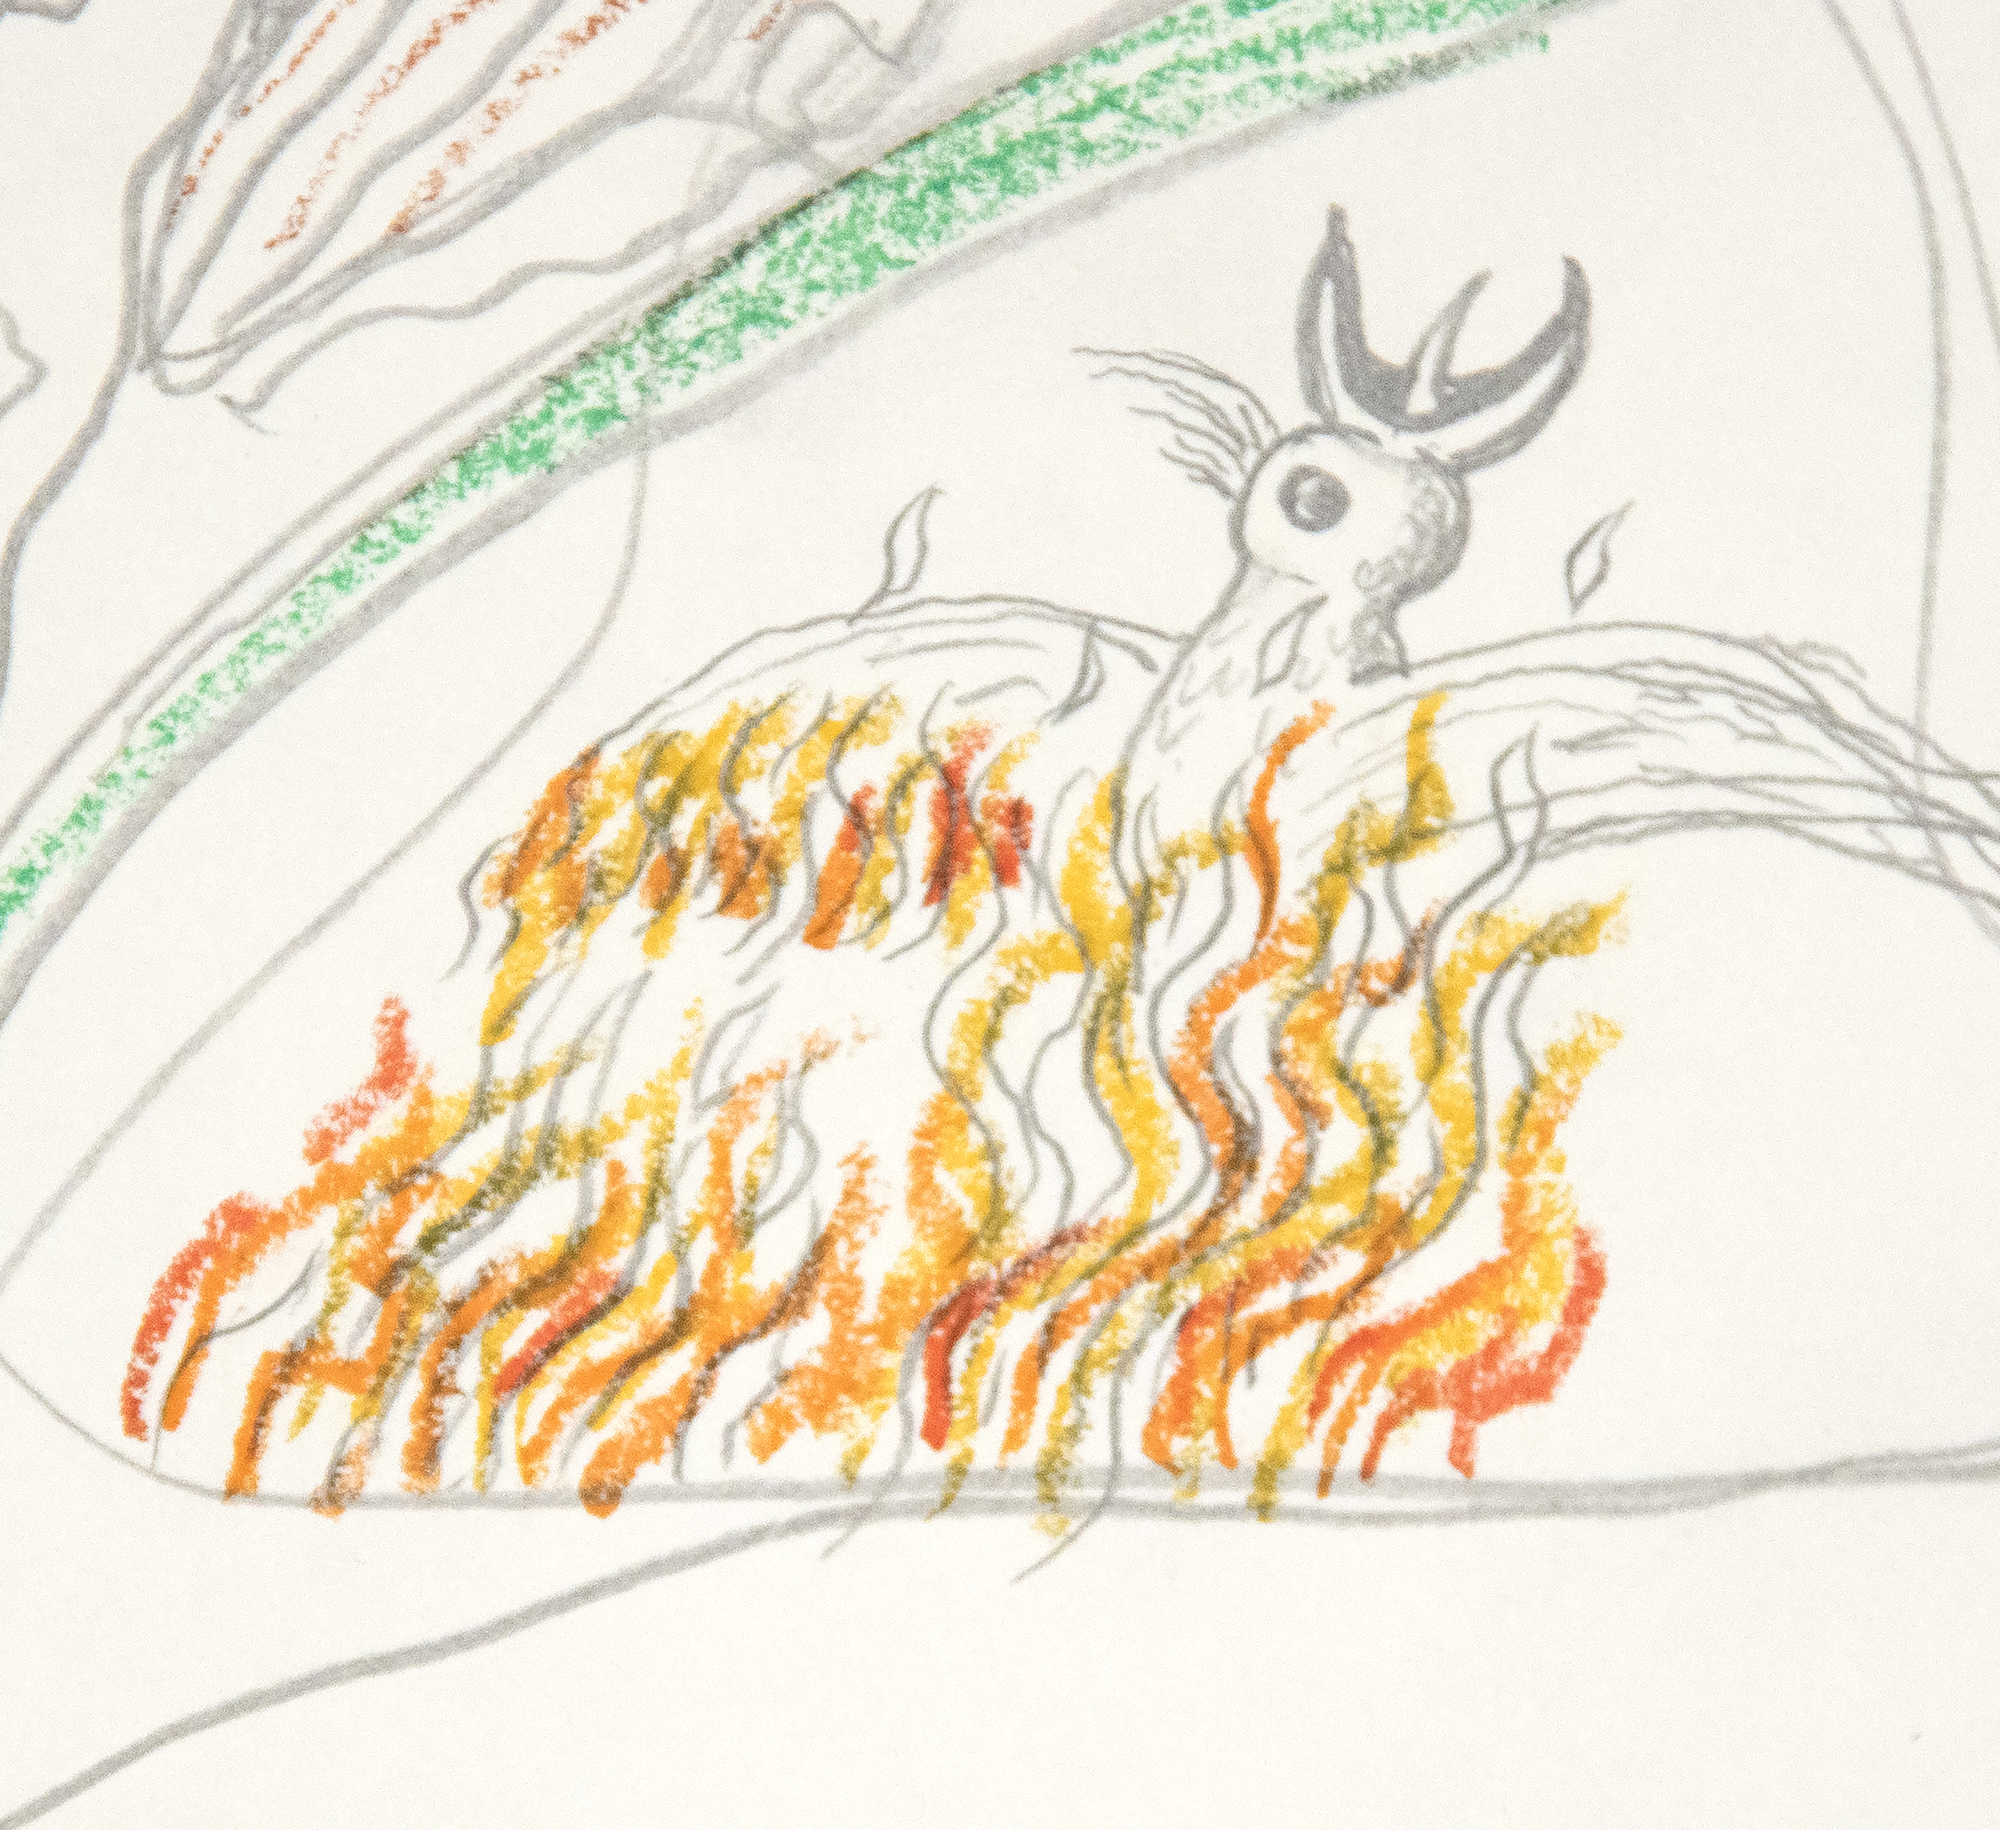 IRVING NORMAN - Untitled (Man with Fire Bird) - graphite and crayon on paper - 12 x 8 7/8 in.